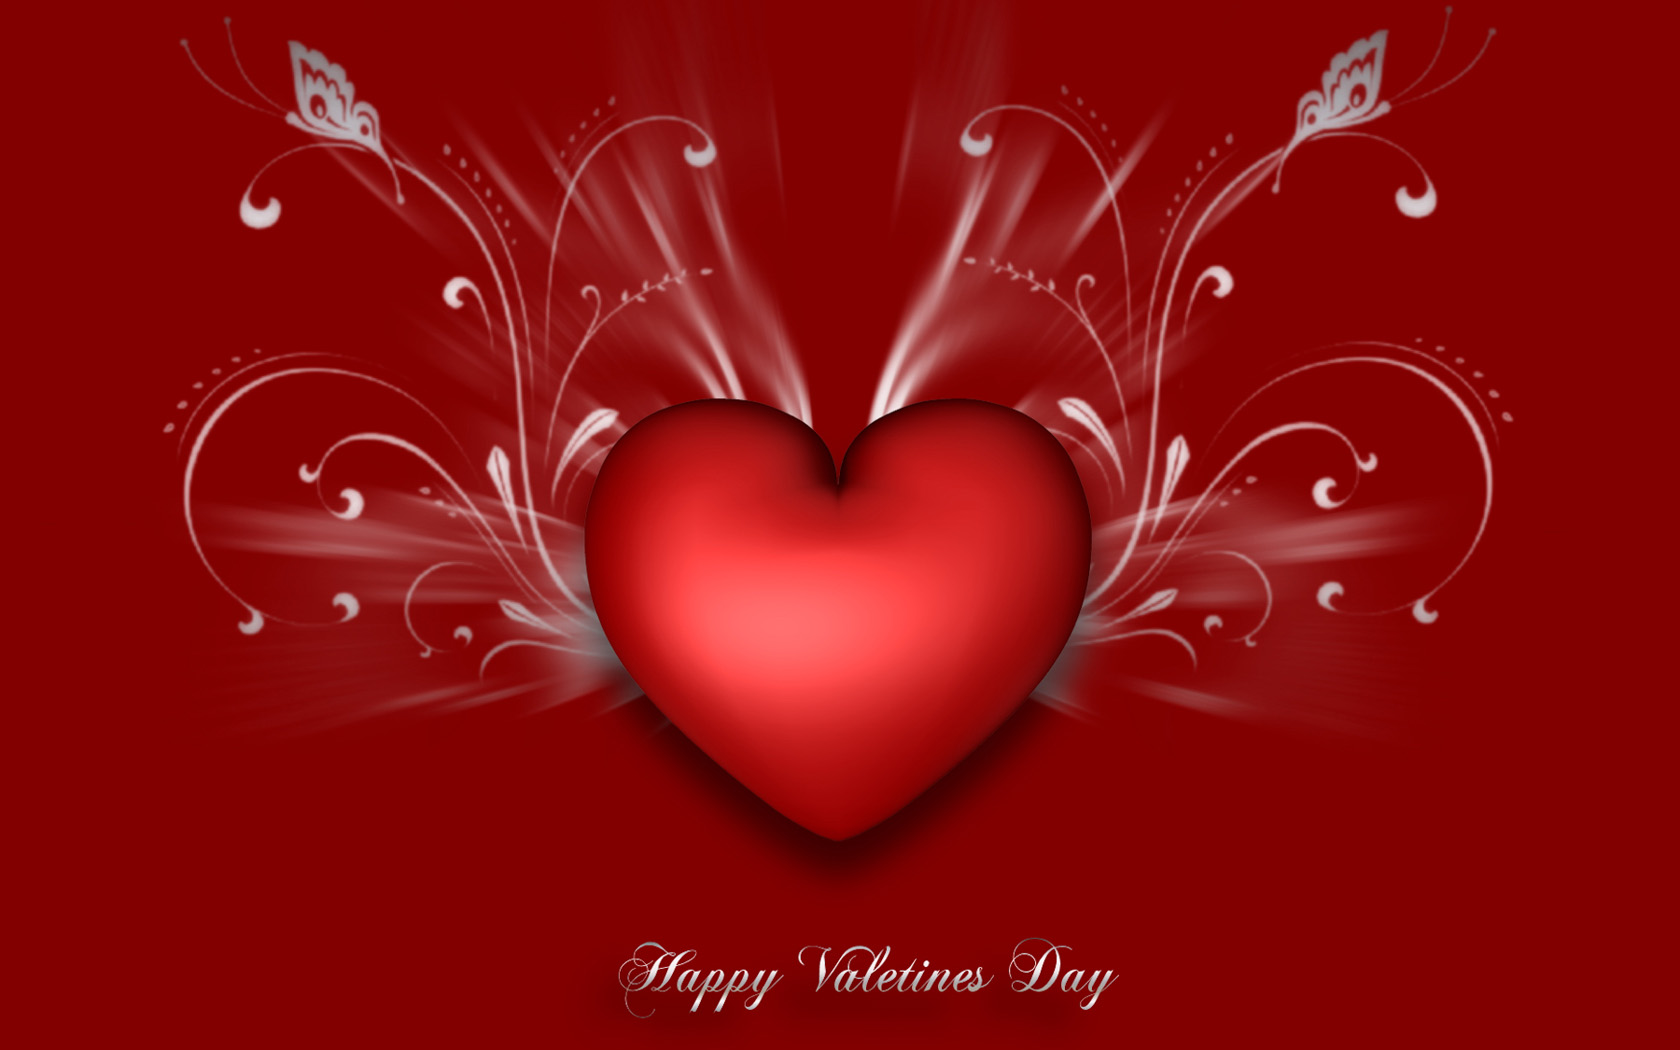 Cute Animal Valentines Day Pictures Description free